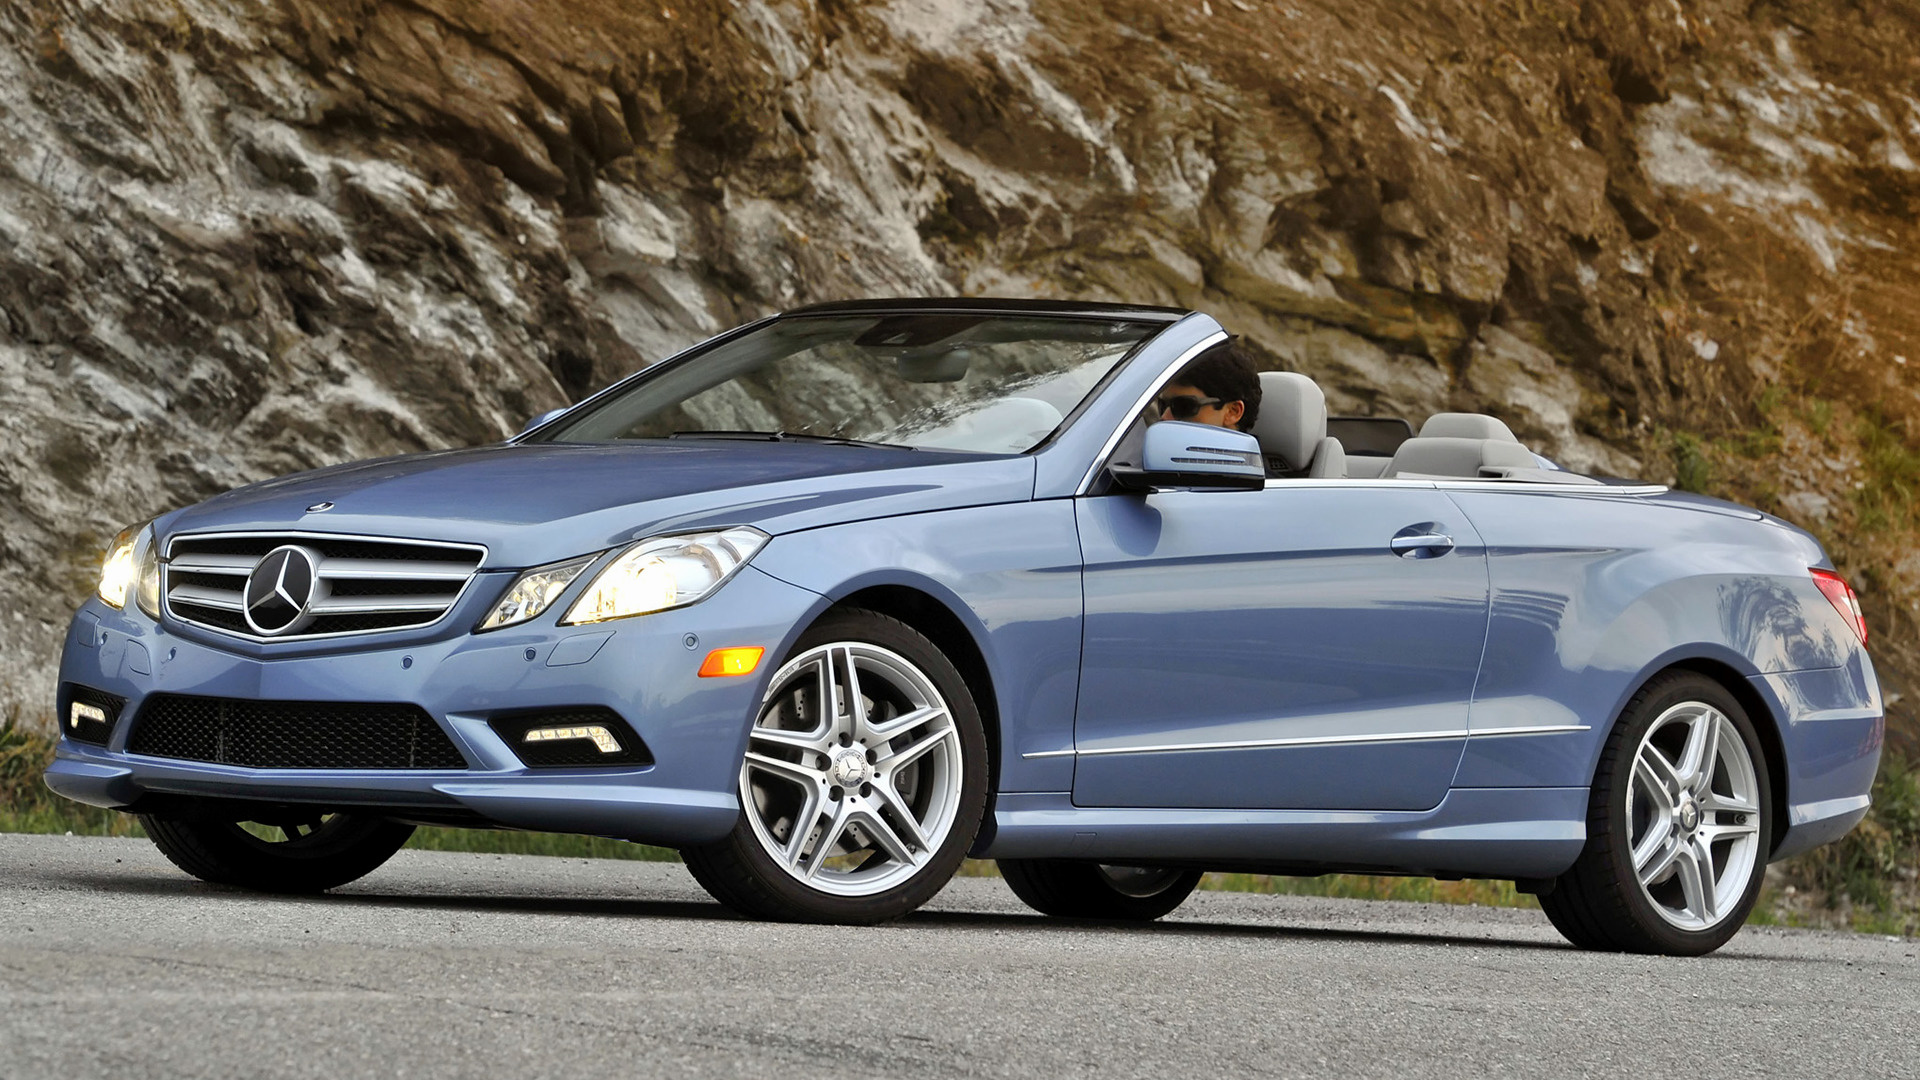 2010 Mercedes-Benz E-Class Cabriolet AMG Styling (US ...